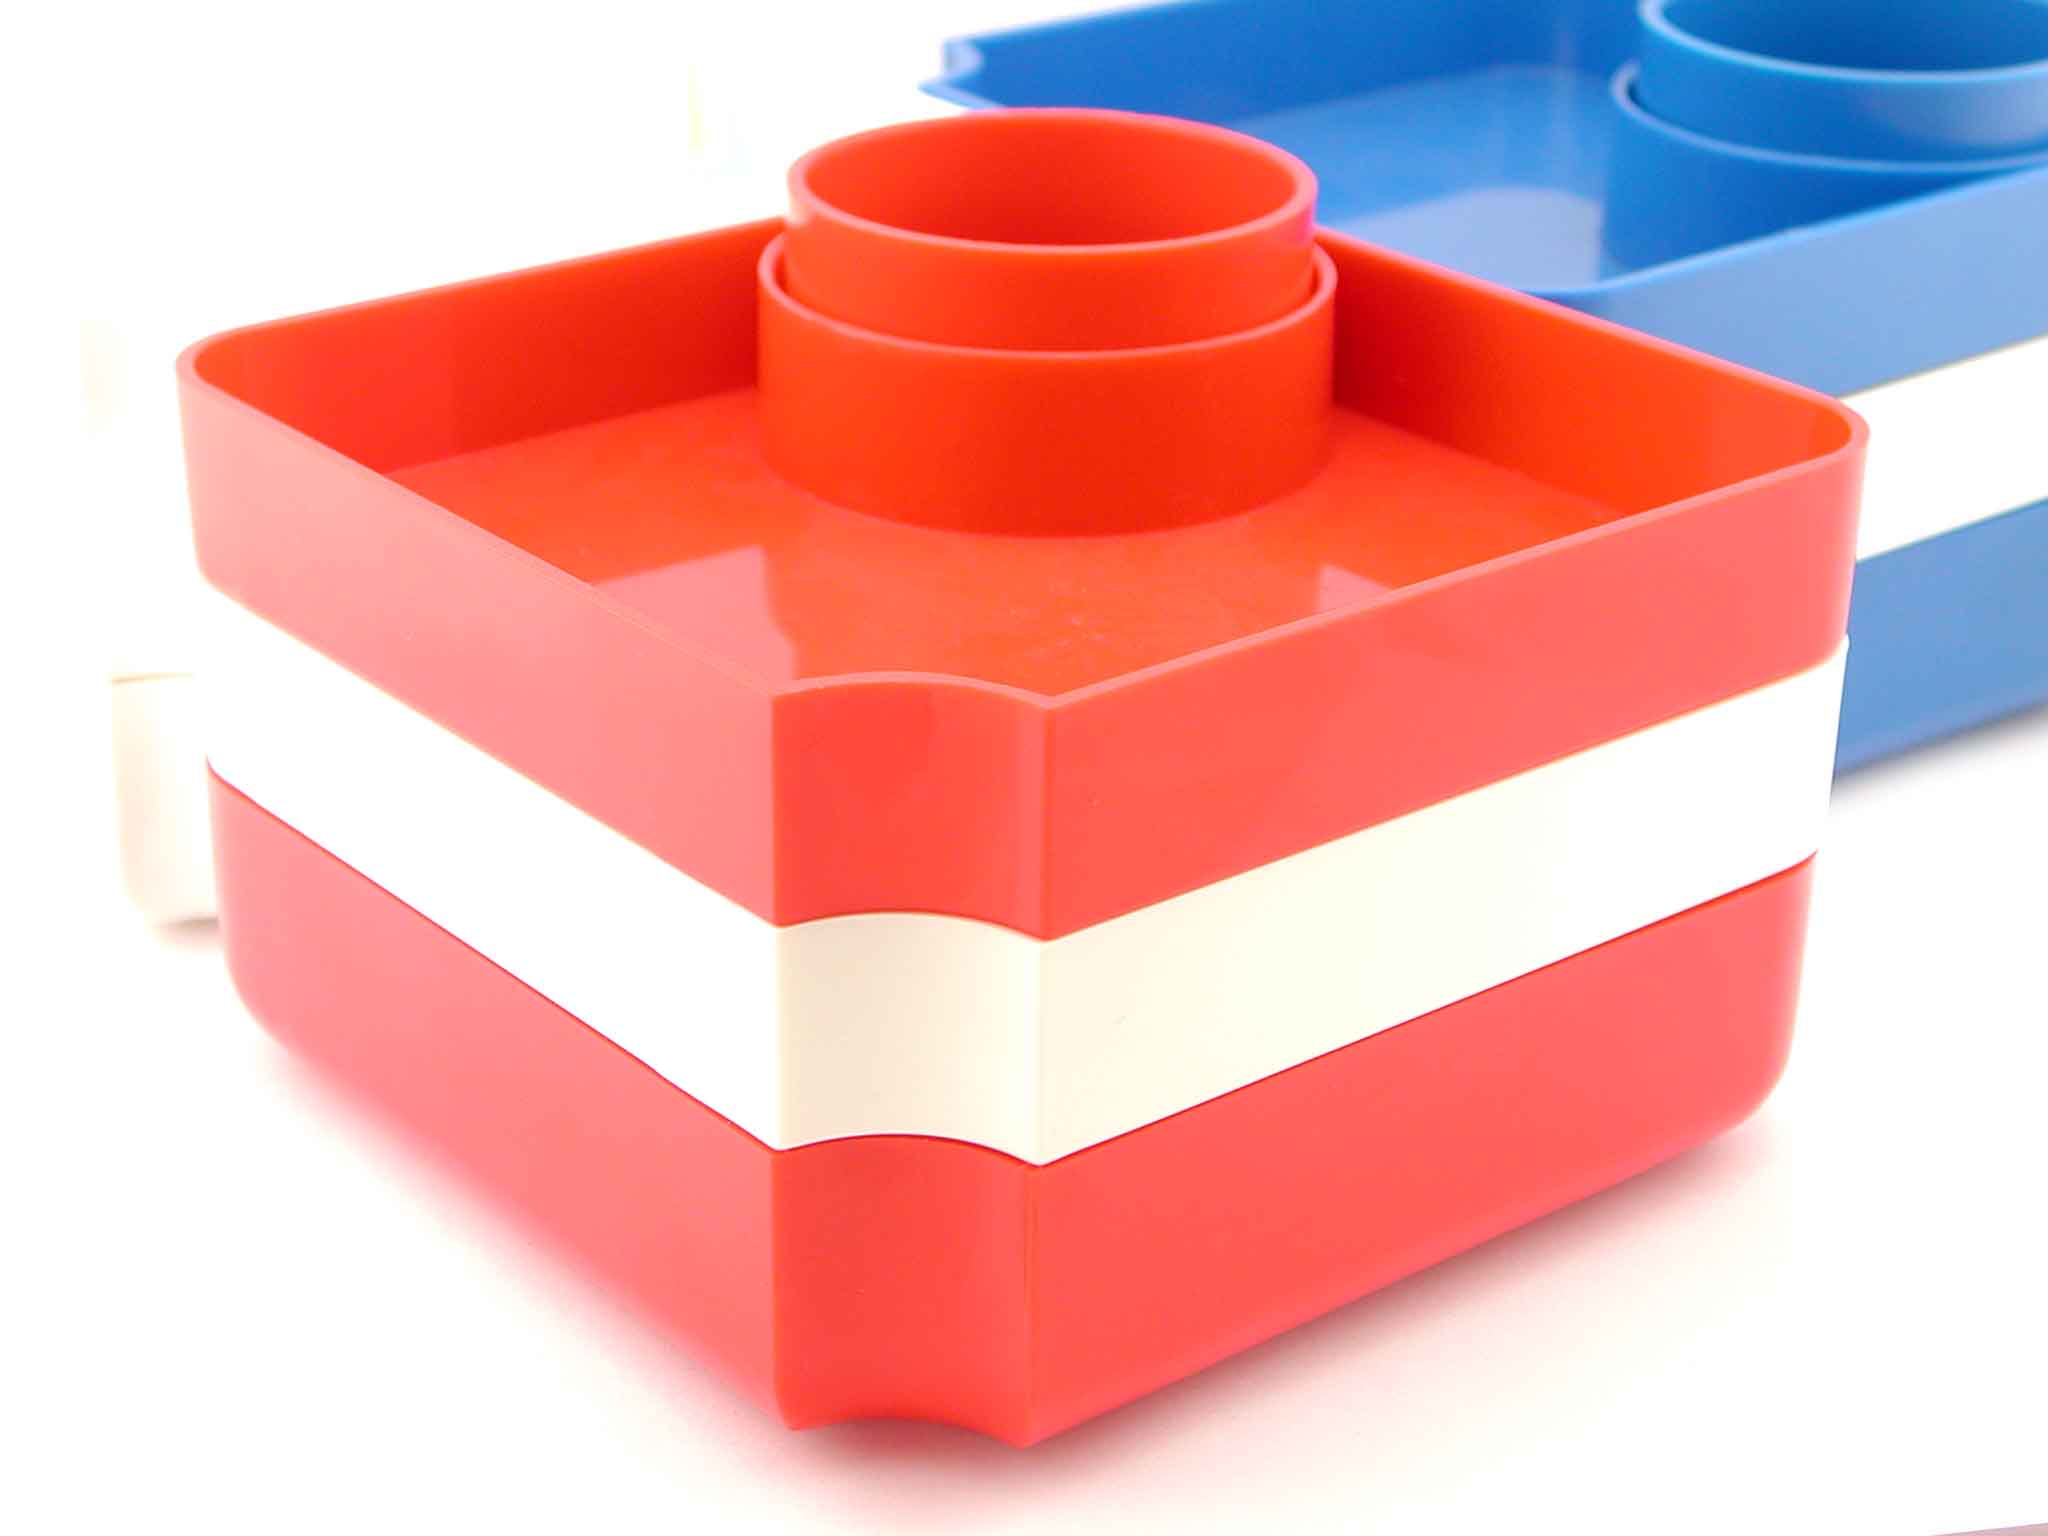  Our Item,Plastic 3-Layer Stationery Tray ( Our Item,Plastic 3-Layer Stationery Tray)